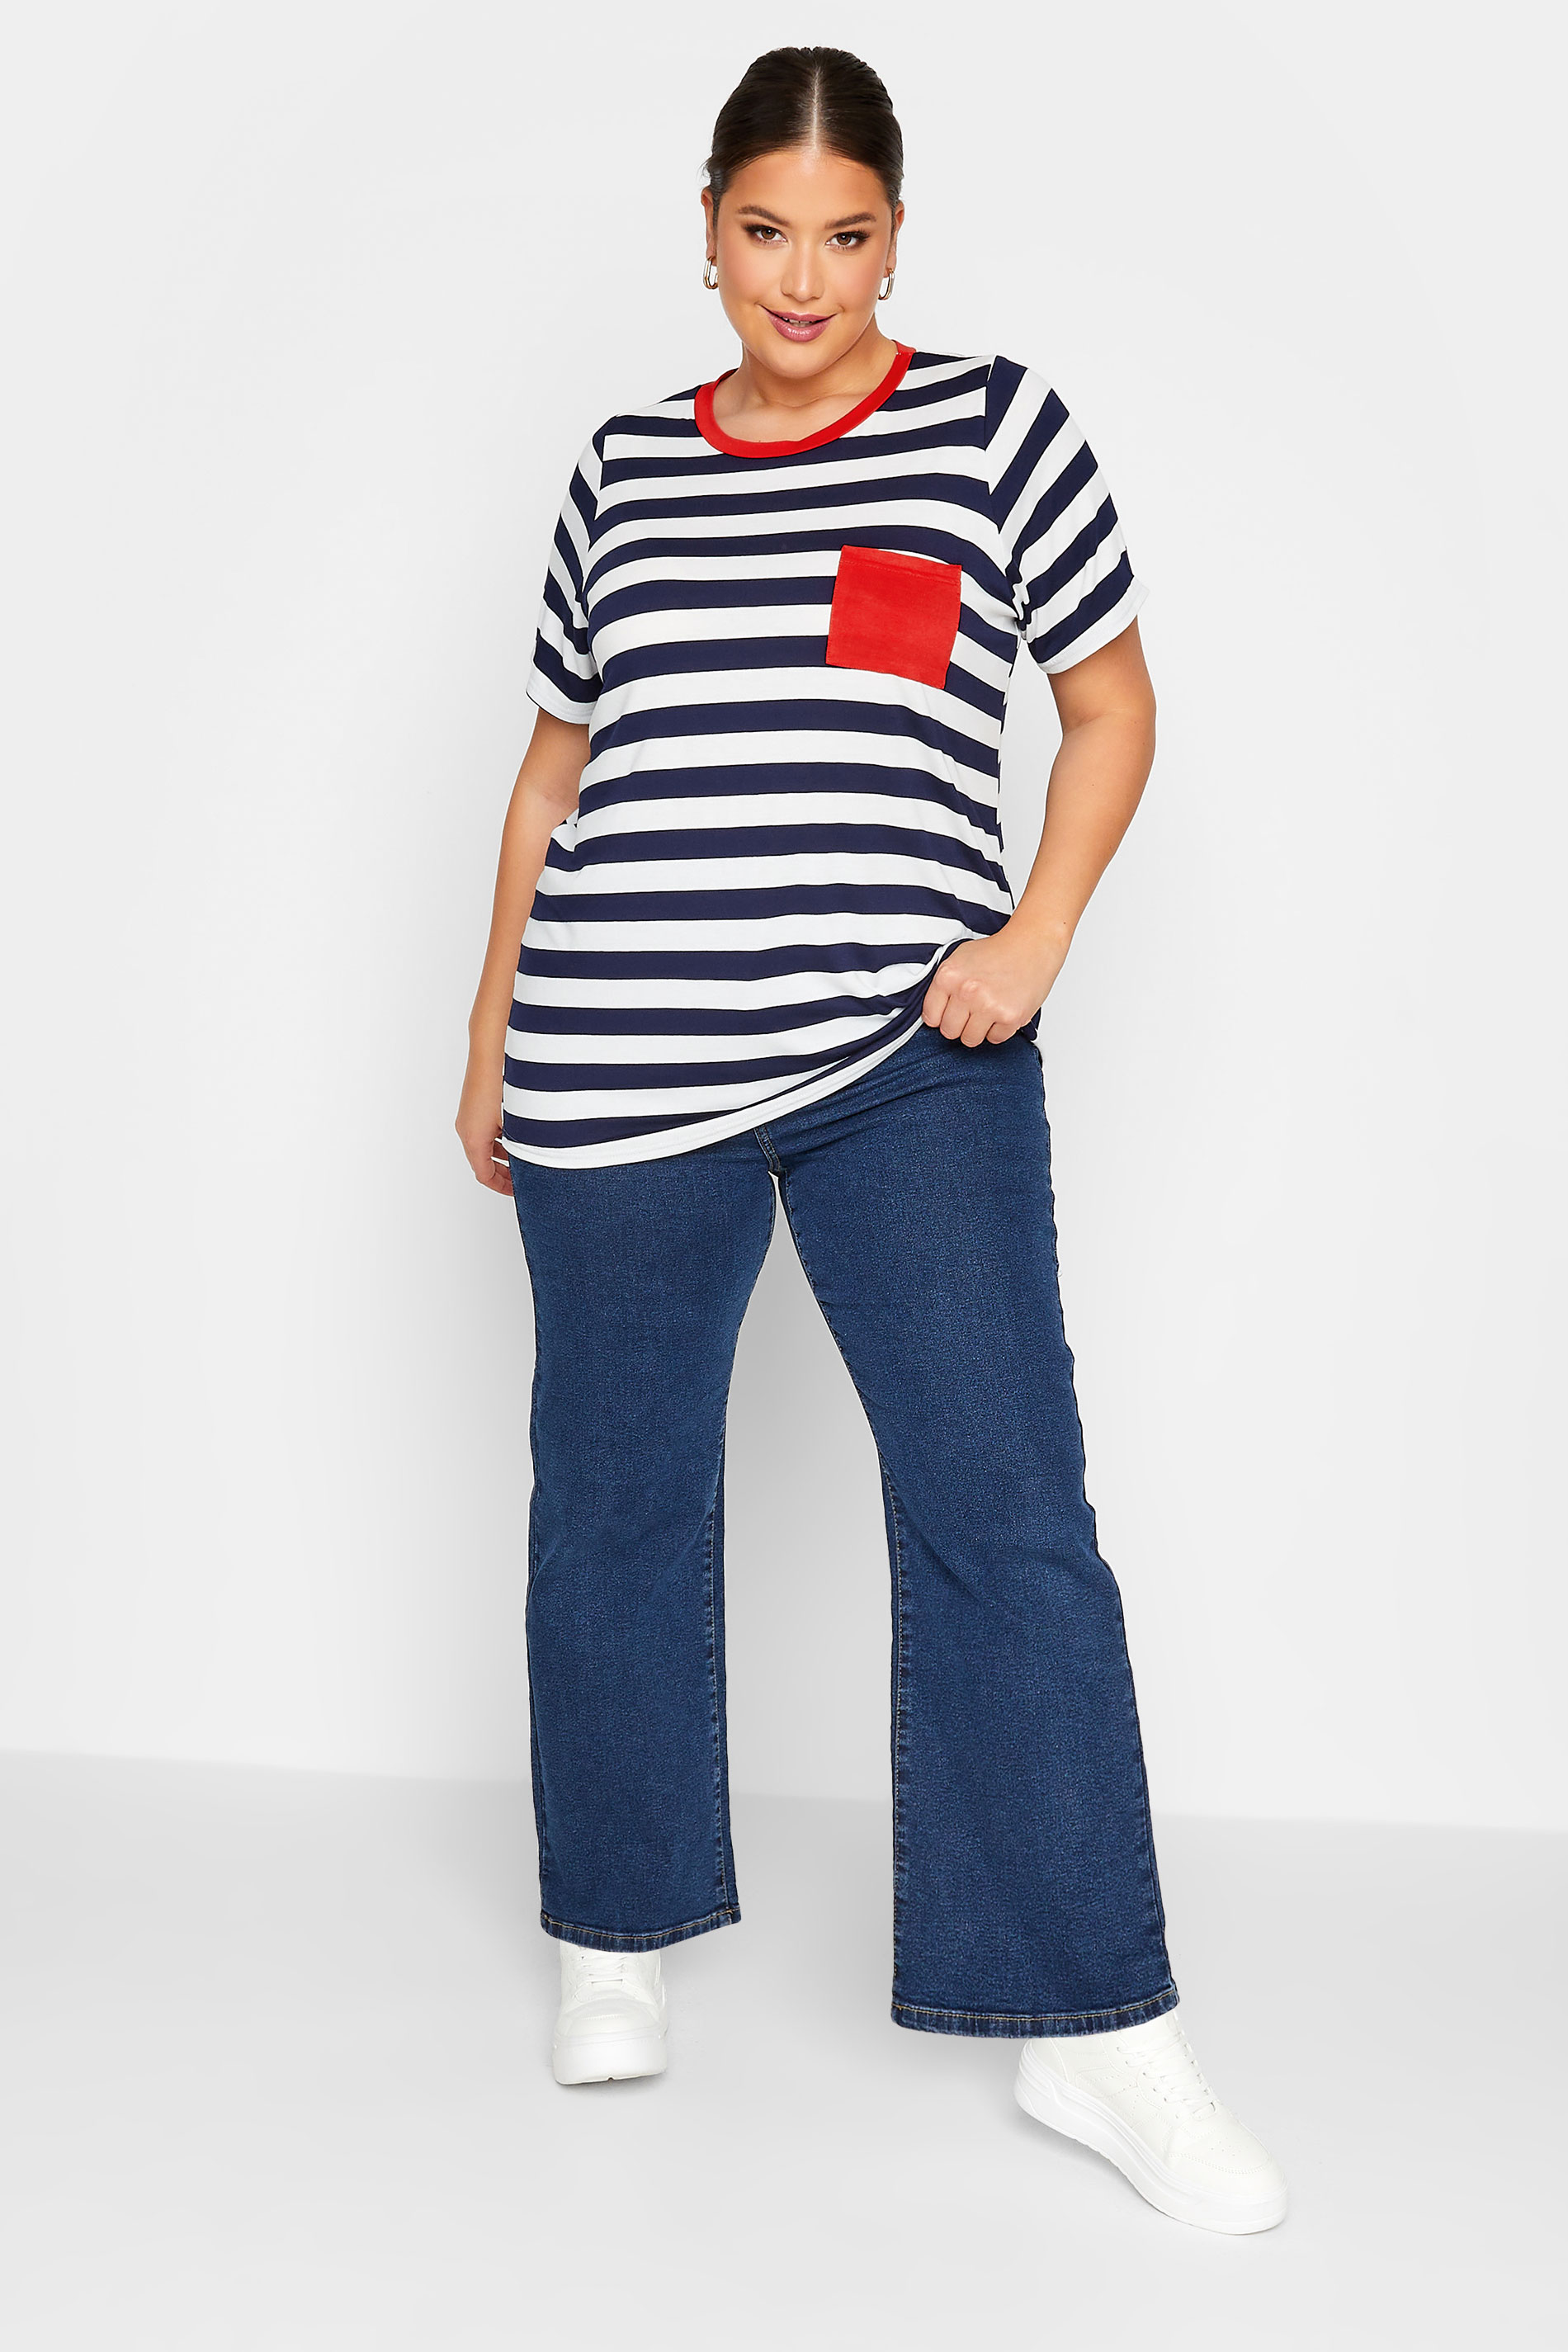 What to look for in shapewear - Pink and Navy StripesPink and Navy  Stripes